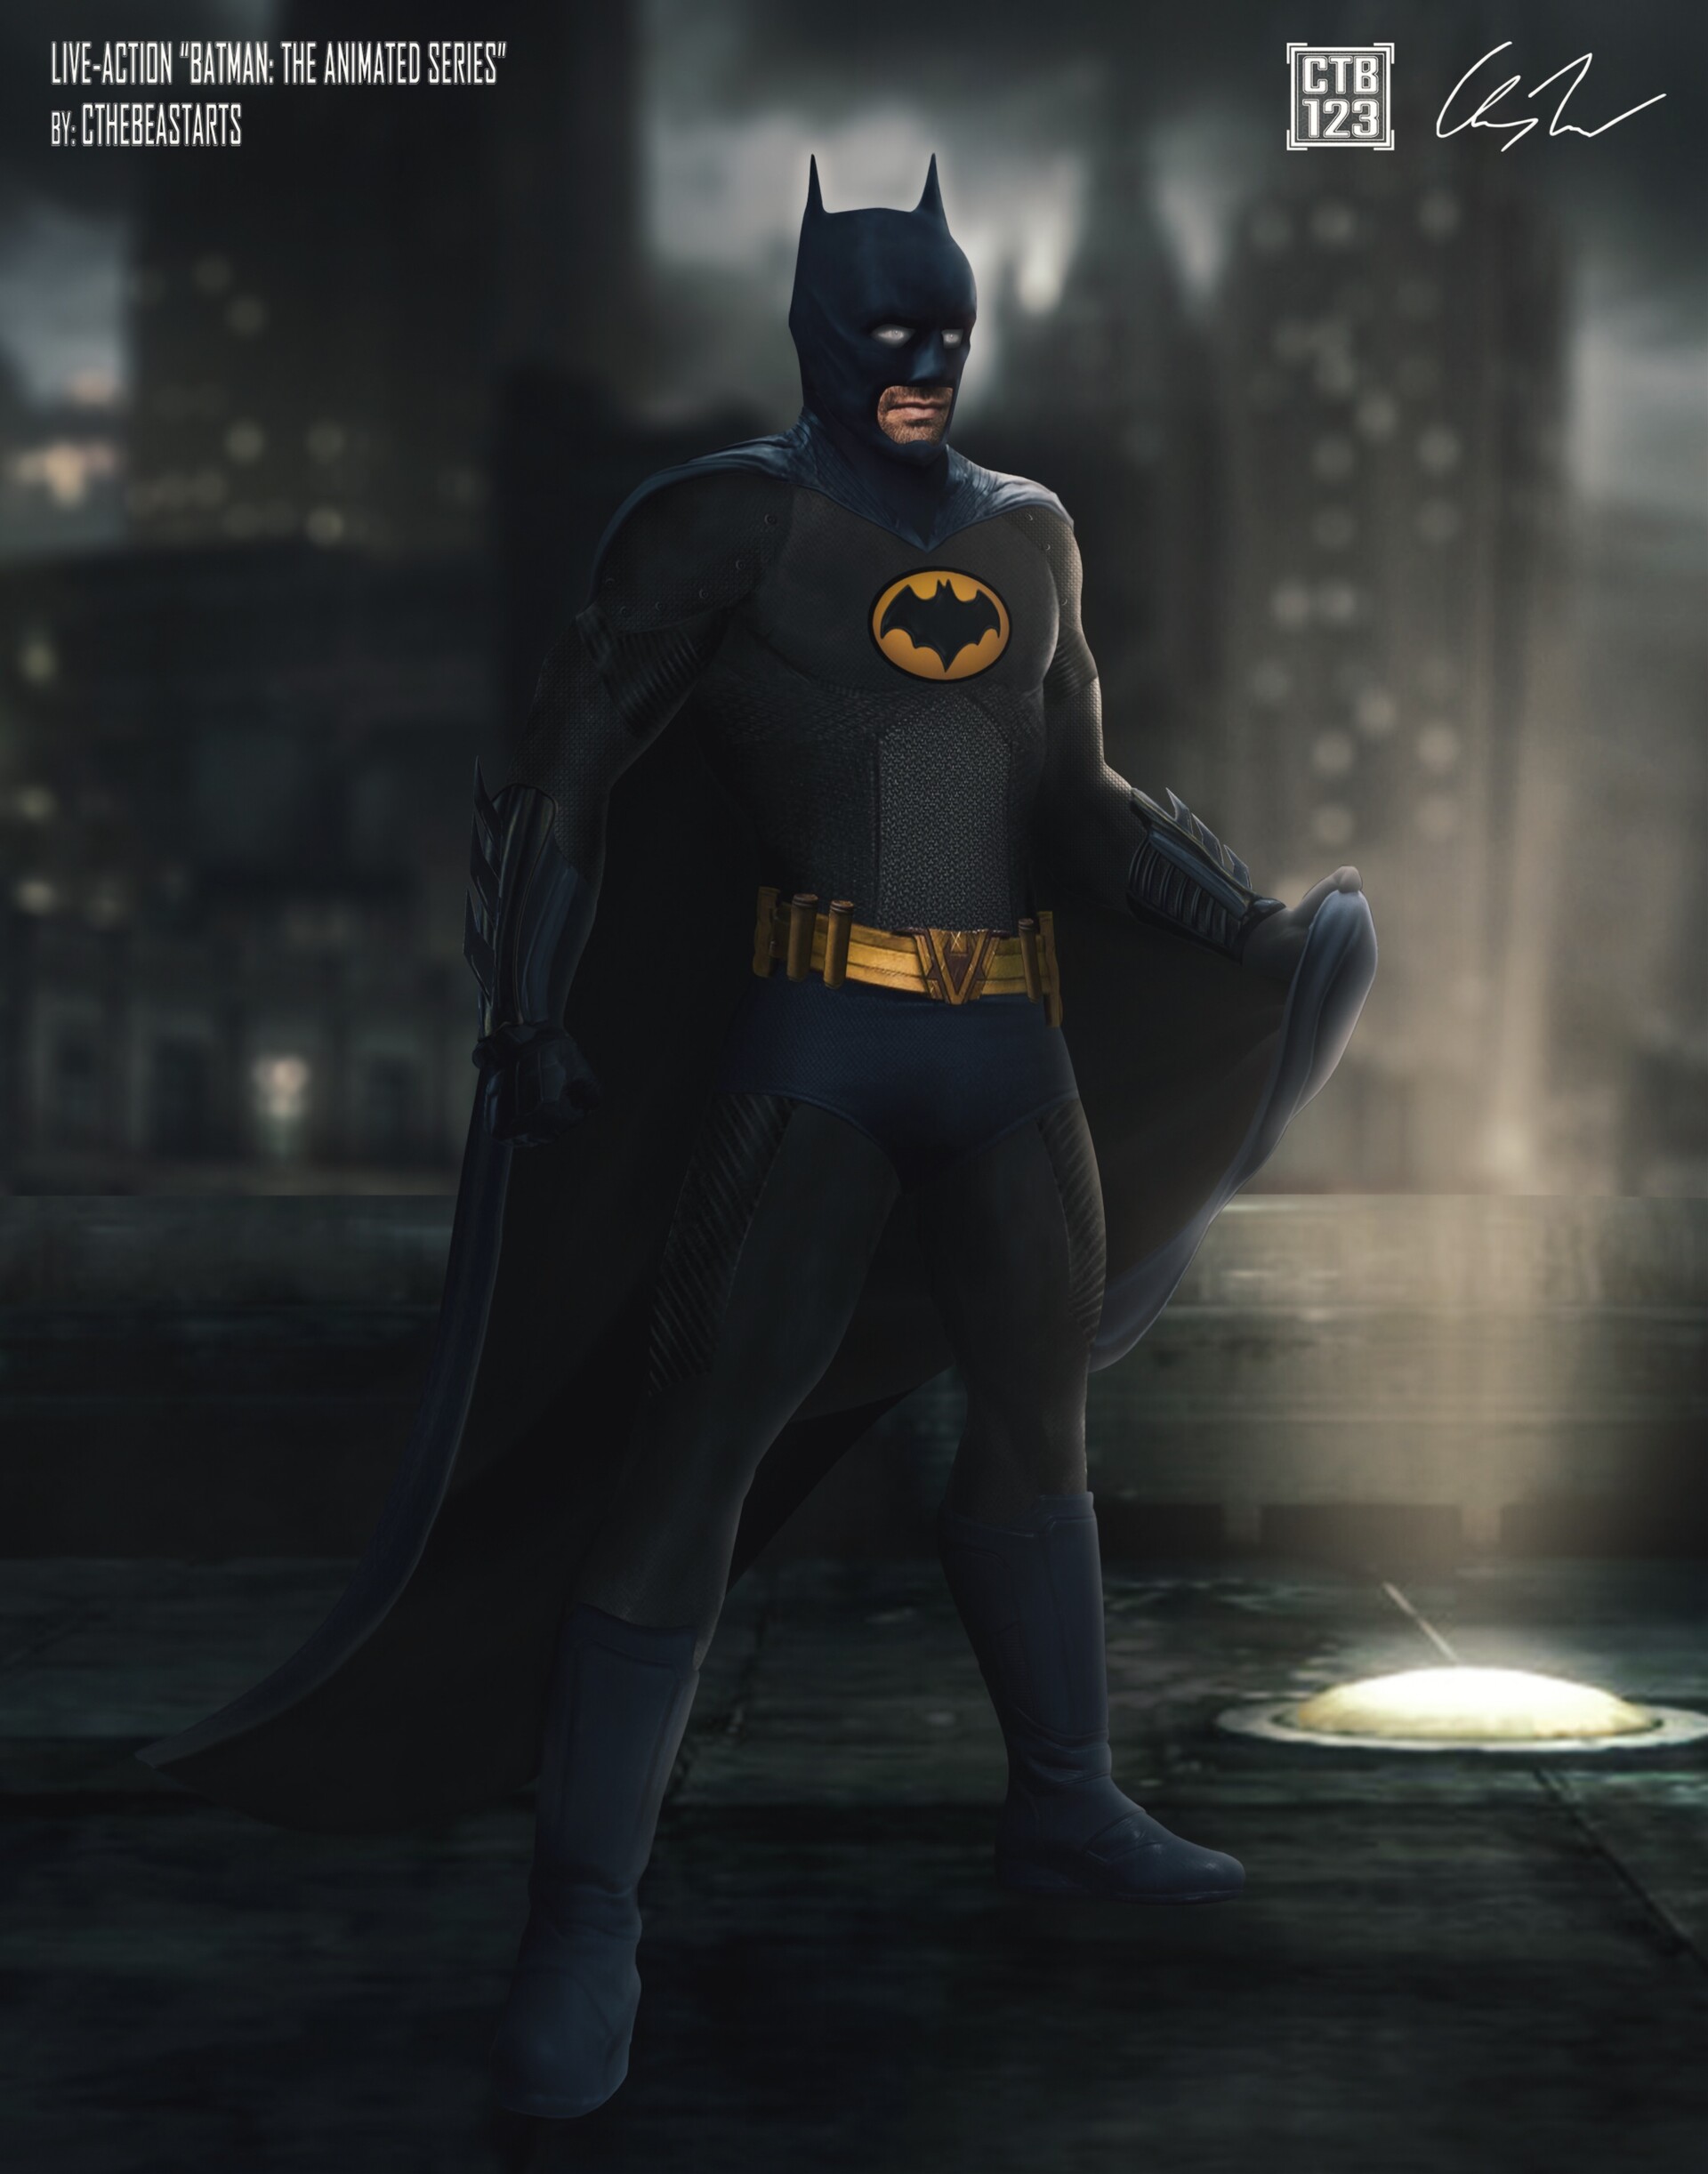 Cthebeast Arts - Live-Action Batman the Animated Series Batsuit